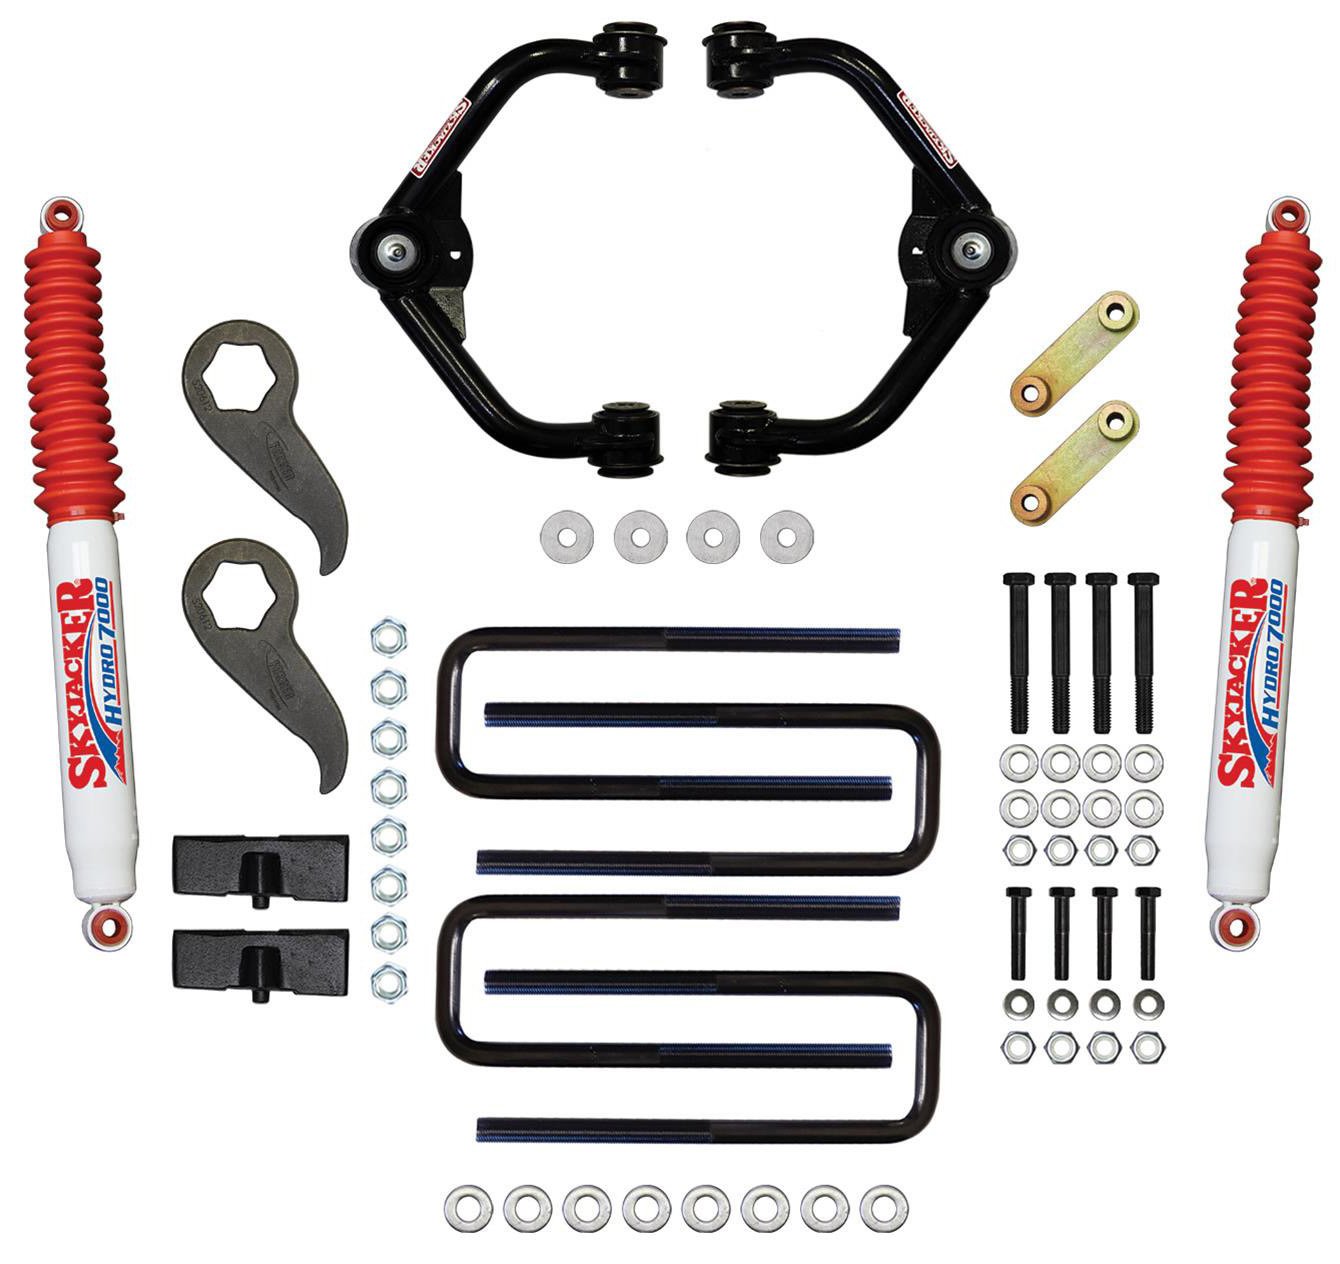 3.0-3.5 in. Suspension Lift Kit for Select GM Trucks with Hydro 7000 Shocks